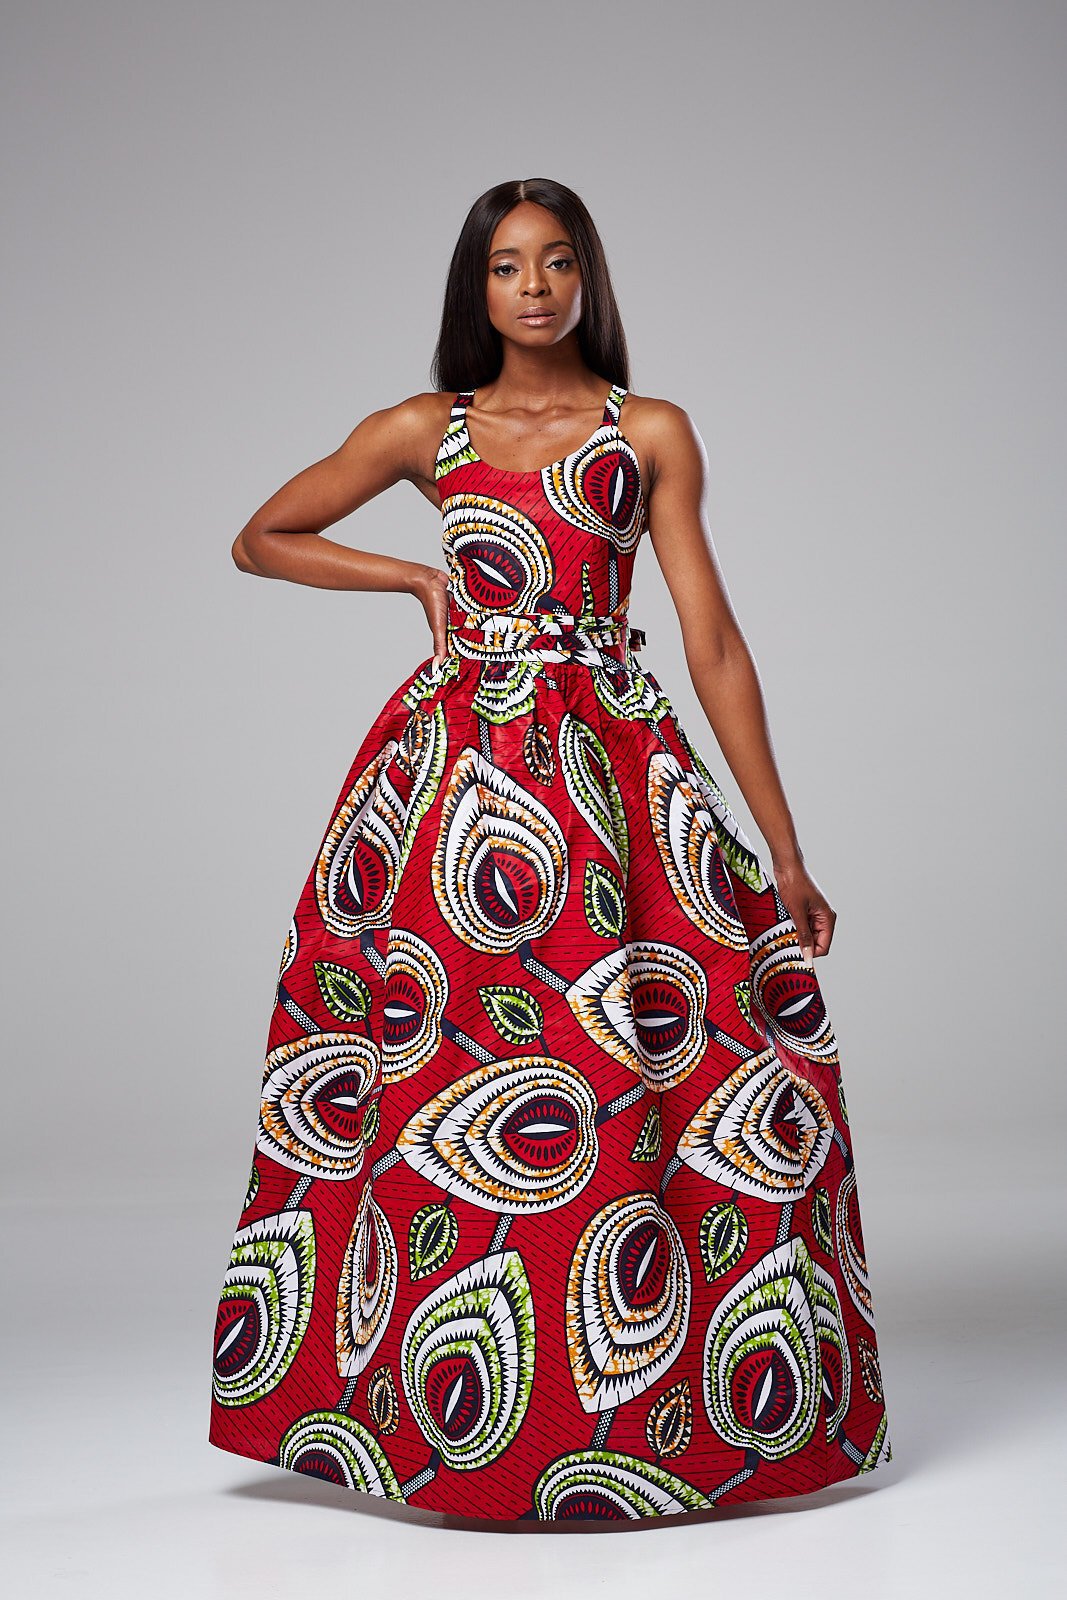 The best selection of over 50 best African print dresses for special occasions. These dresses are perfect for traditional weddings, prom dates, and religious ceremonies. From ankara Dutch wax, Kente, to Kitenge and Dashiki. All your favorite styles in one place (+find out where to get them). Click to see all! Ankara, Dutch wax, Kente, Kitenge, Dashiki, African print dress, African fashion, African women dresses, African prints, Nigerian style, Ghanaian fashion, Senegal fashion, Kenya fashion, Nigerian fashion #africanprint #ankarastyles #africanfashion